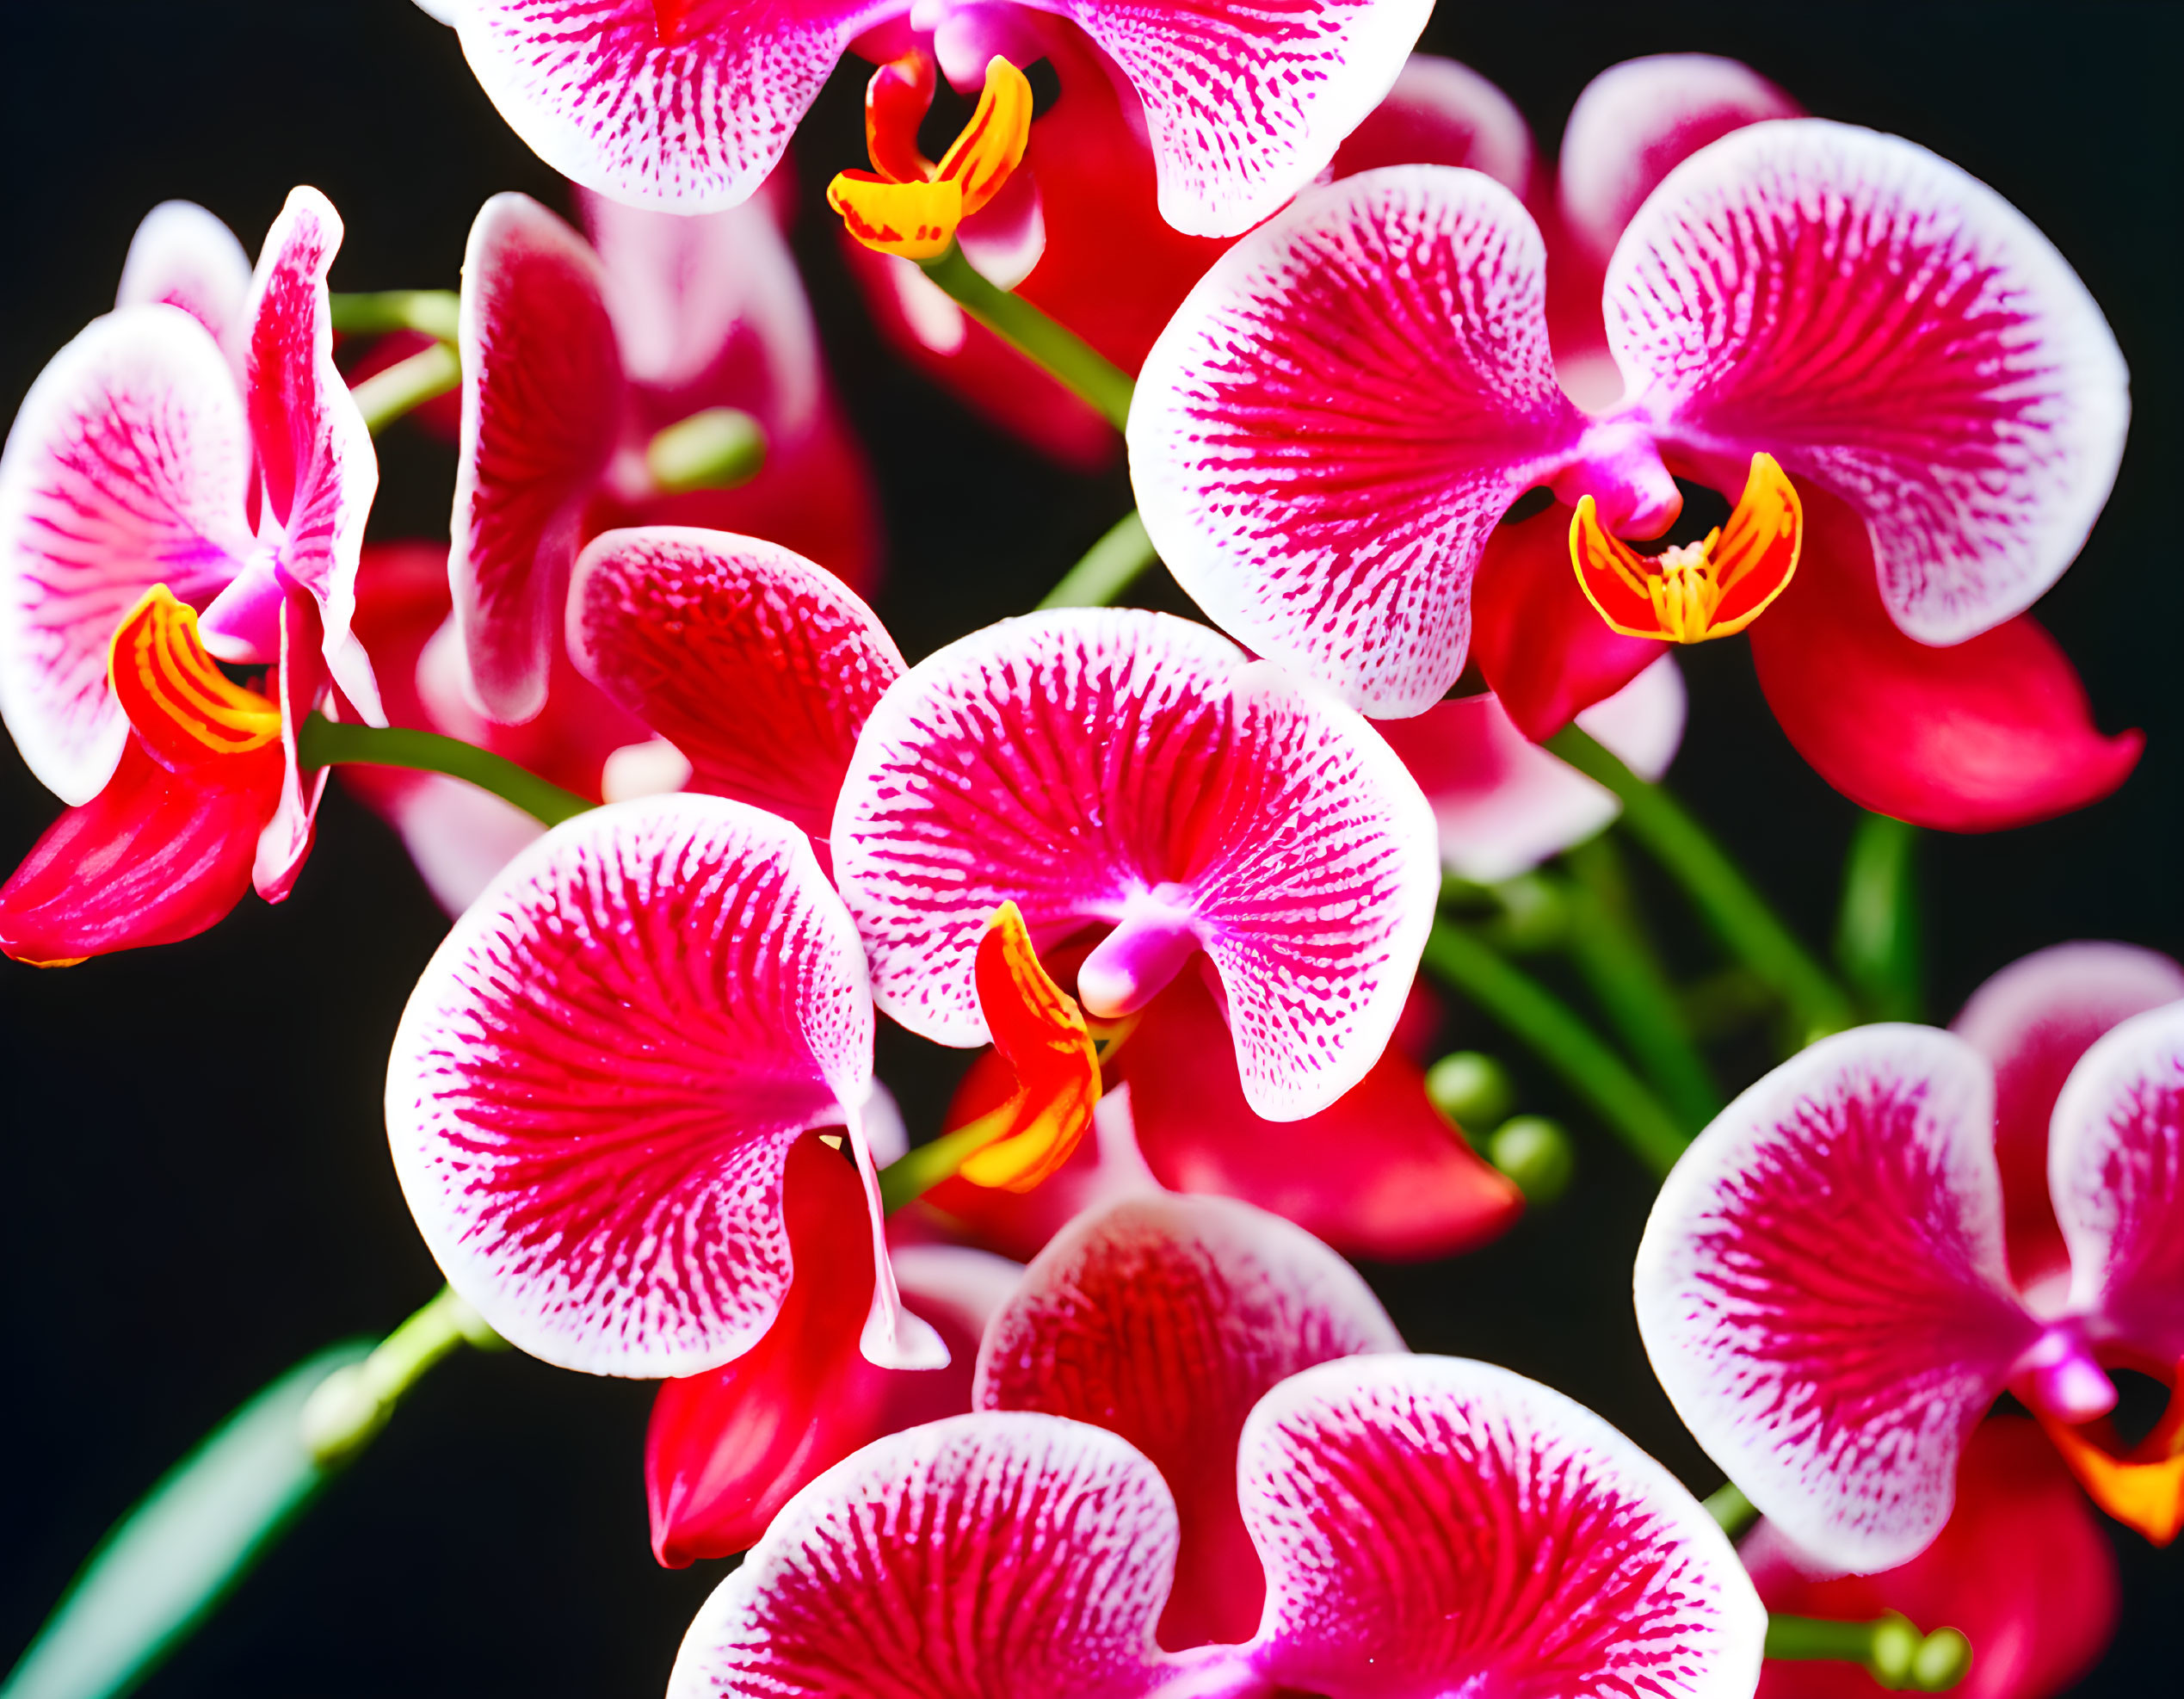 Vibrant pink orchids with white pattern and yellow centers on dark background